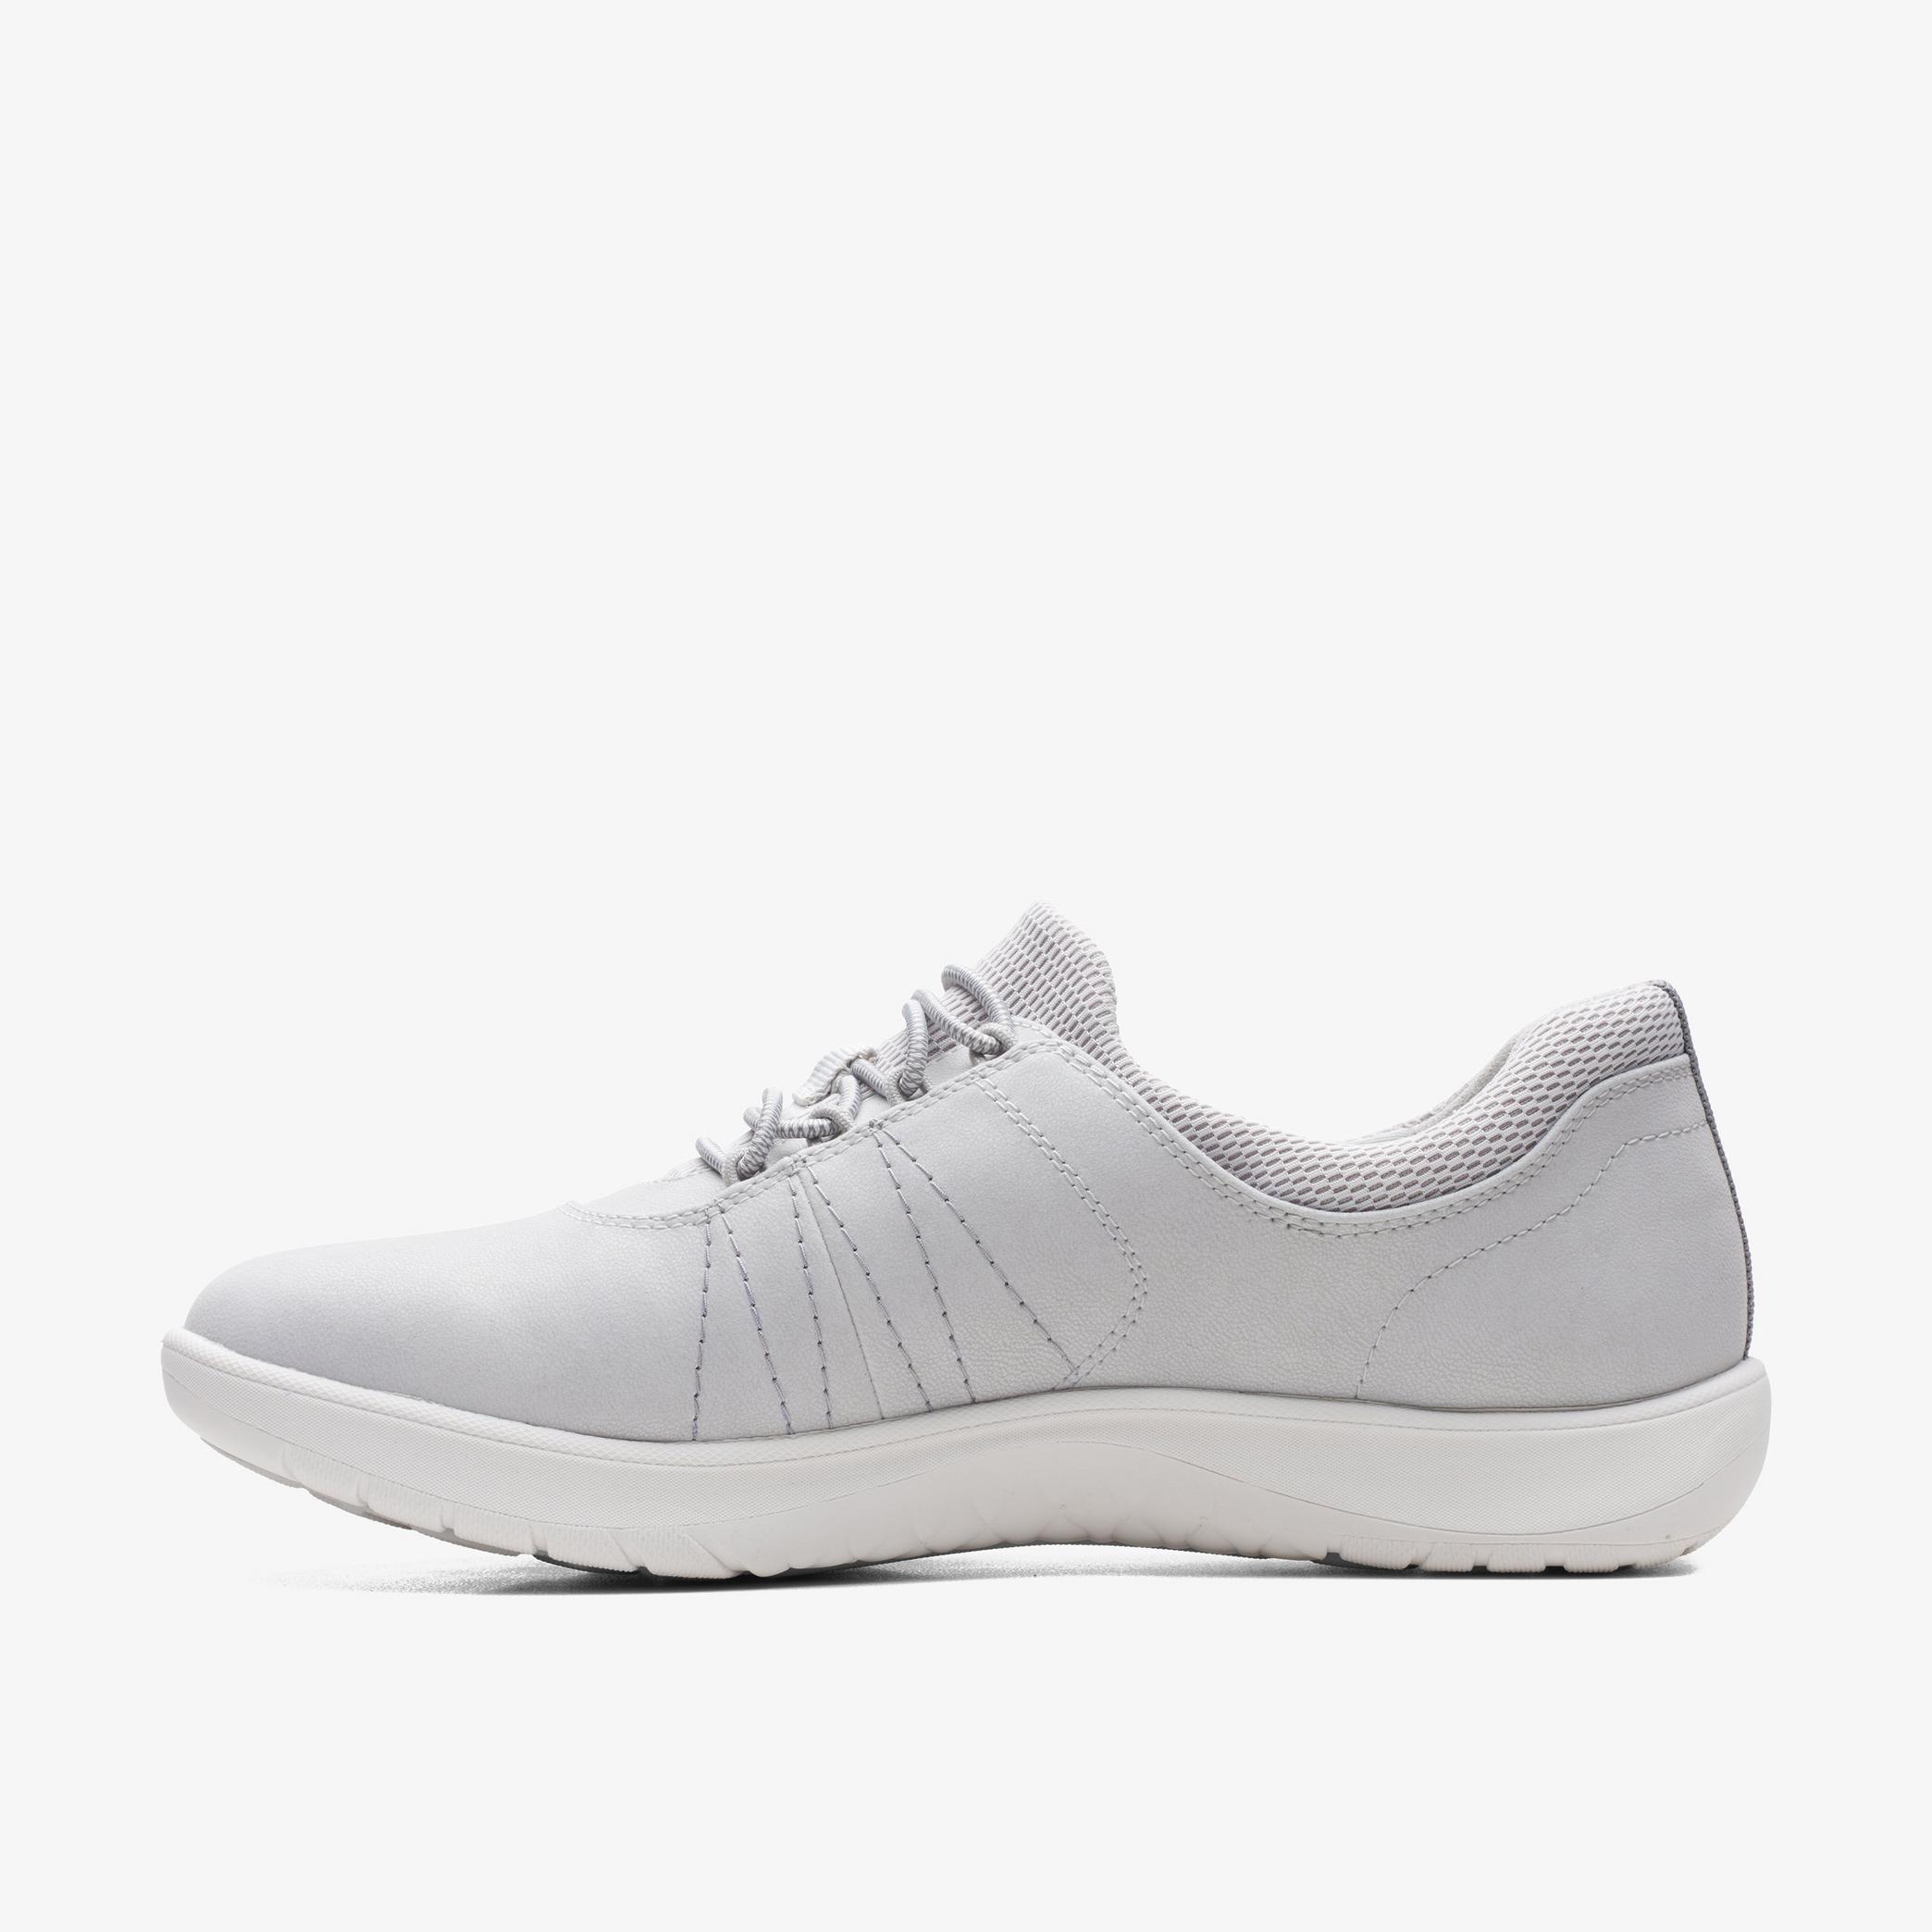 WOMENS Adella Stroll Light Grey Trouser Shoes | Clarks Outlet